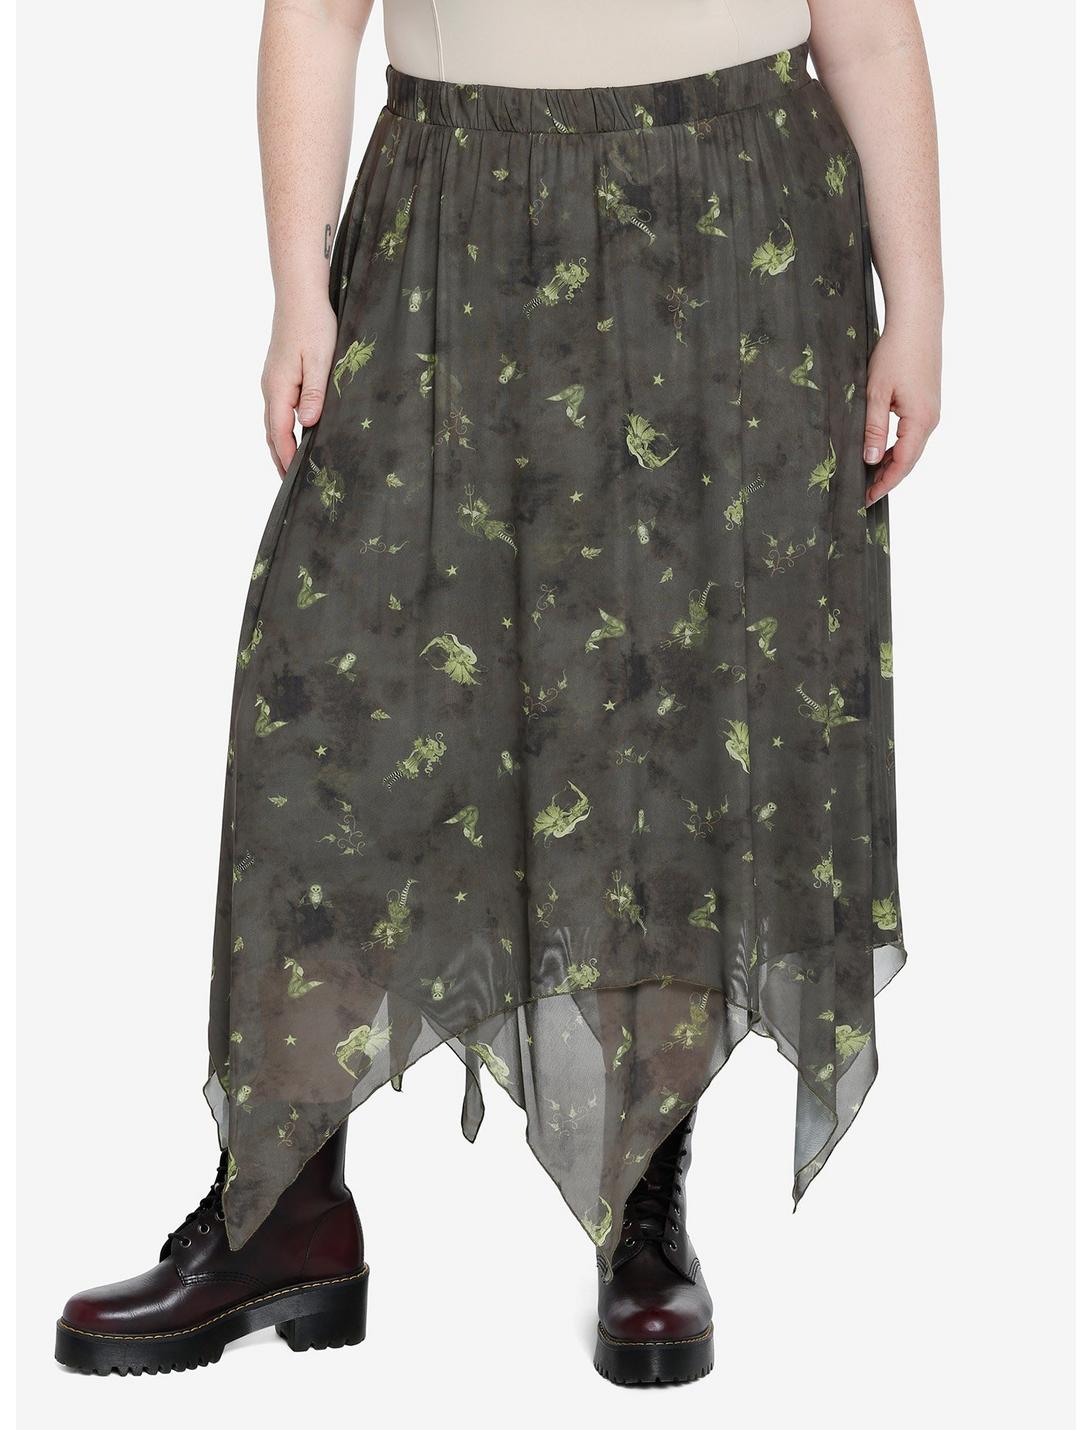 Forest Fairy Hanky Hem Midi Skirt Plus Size By Amy Brown, MULTI, hi-res